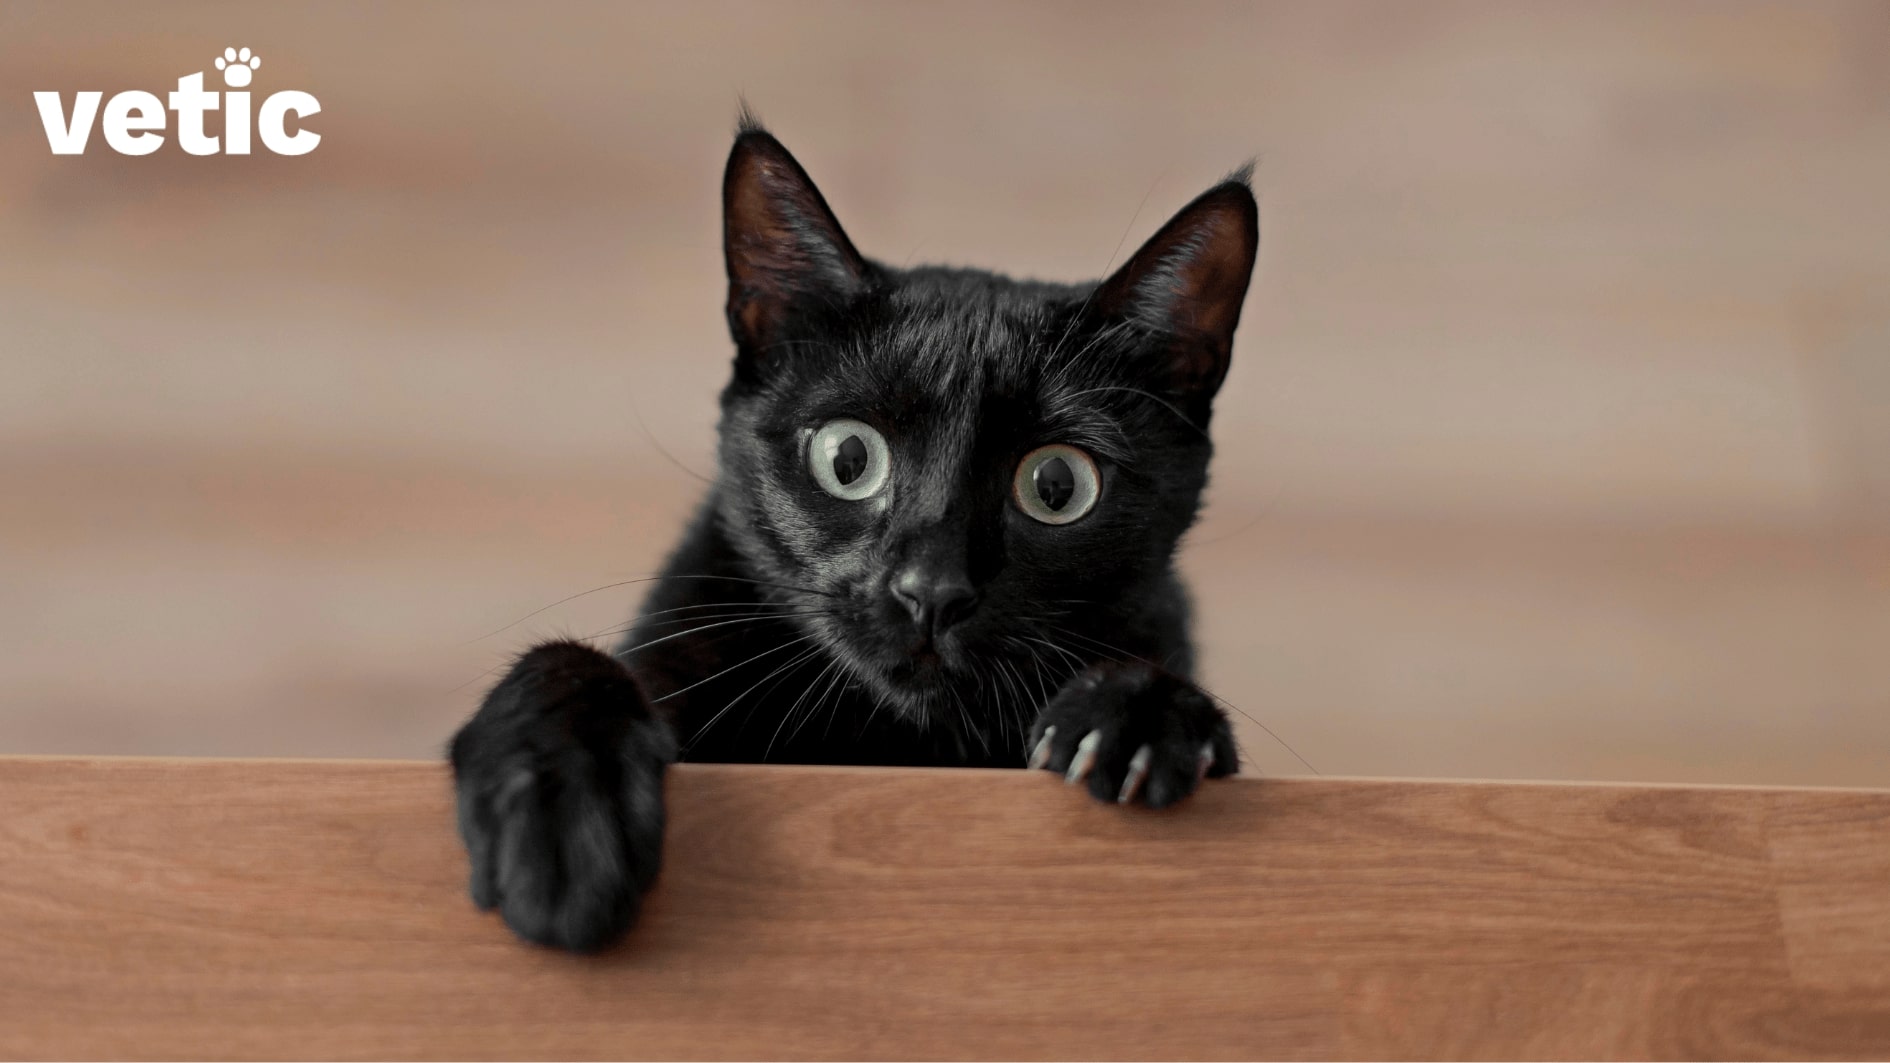 Curious looking black cat with green eyes peeping from behind a wooden block. Cats are intelligent and curious creatures. If you are leaving your cat alone, ensure they still have enough sources of mental stimulation to prevent anxiety and destructive behaviour.